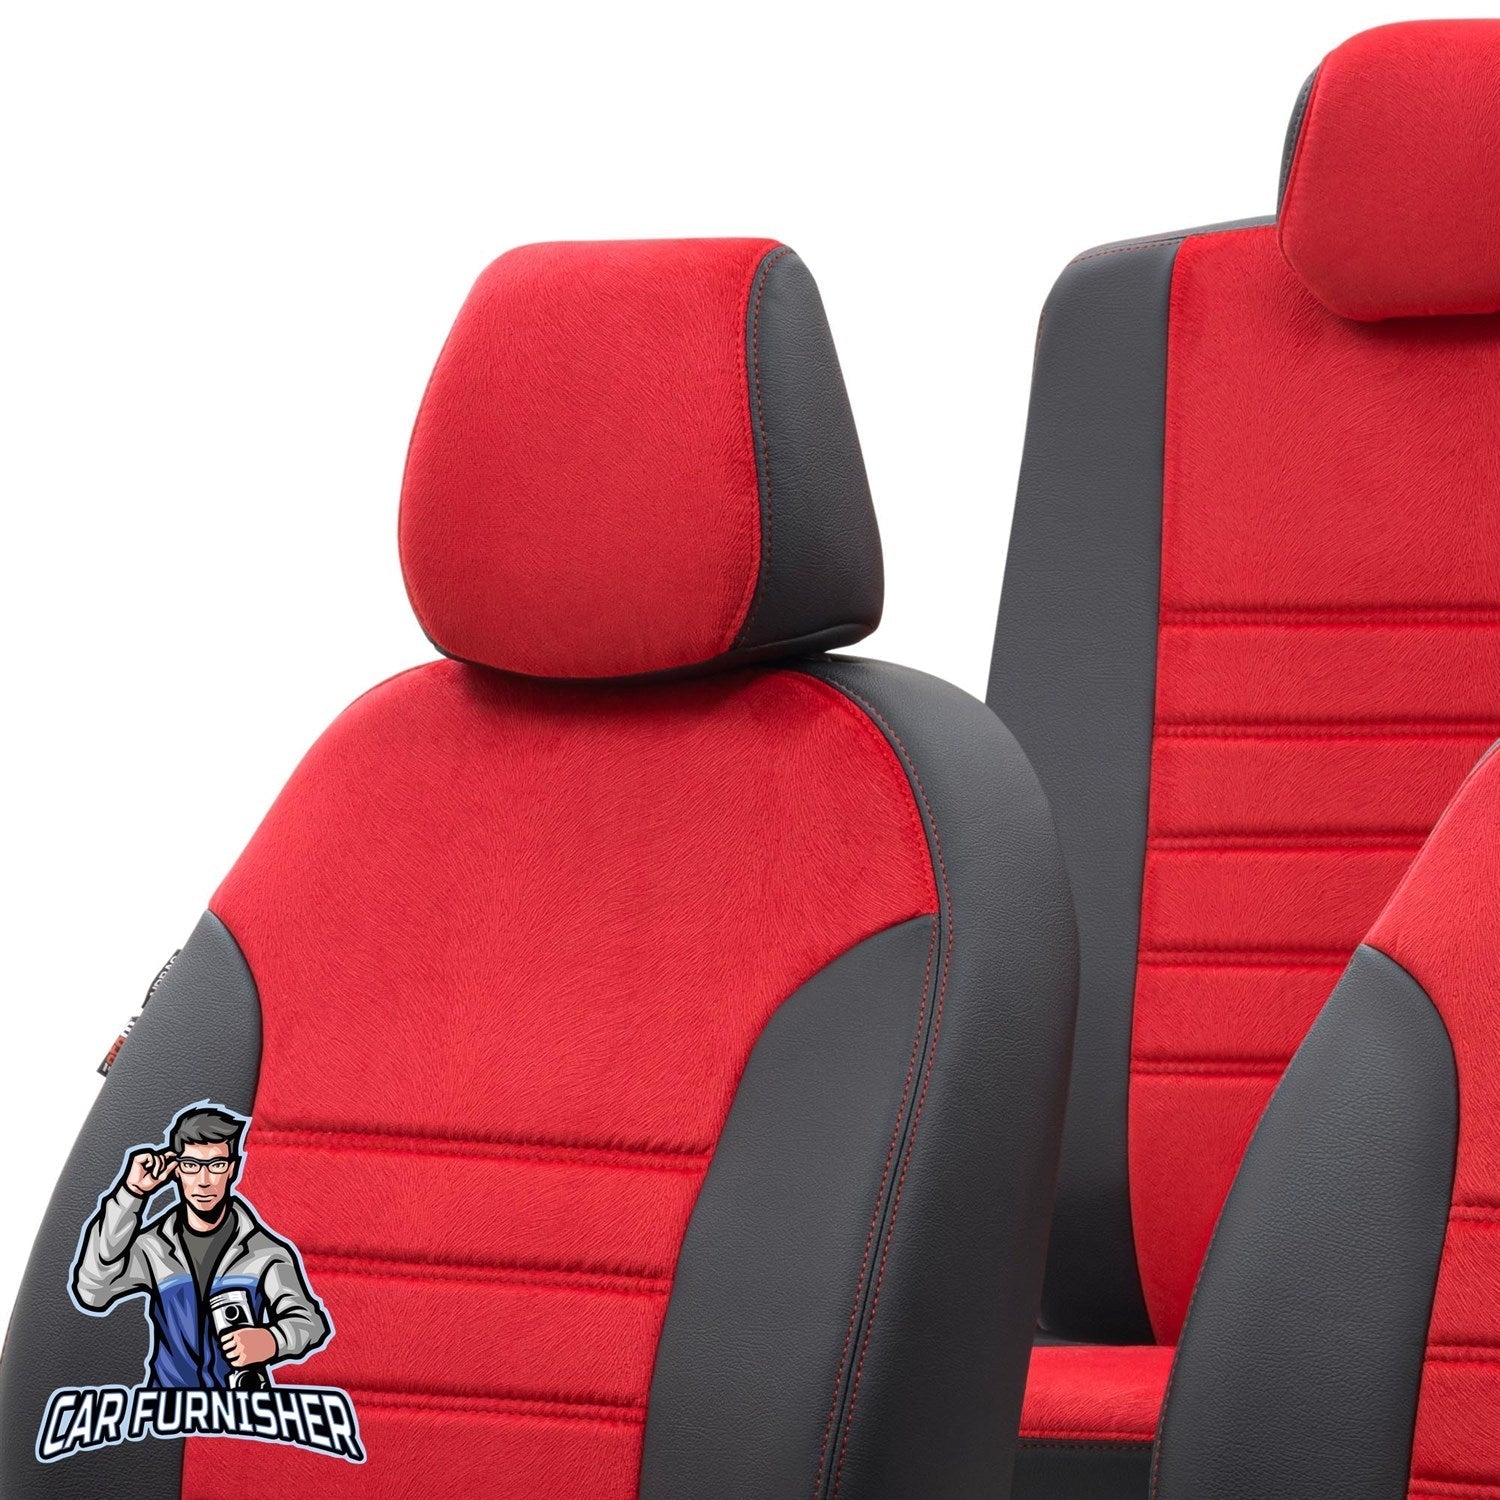 Opel Movano Car Seat Covers 2010-2019 London Design Red Leather & Fabric